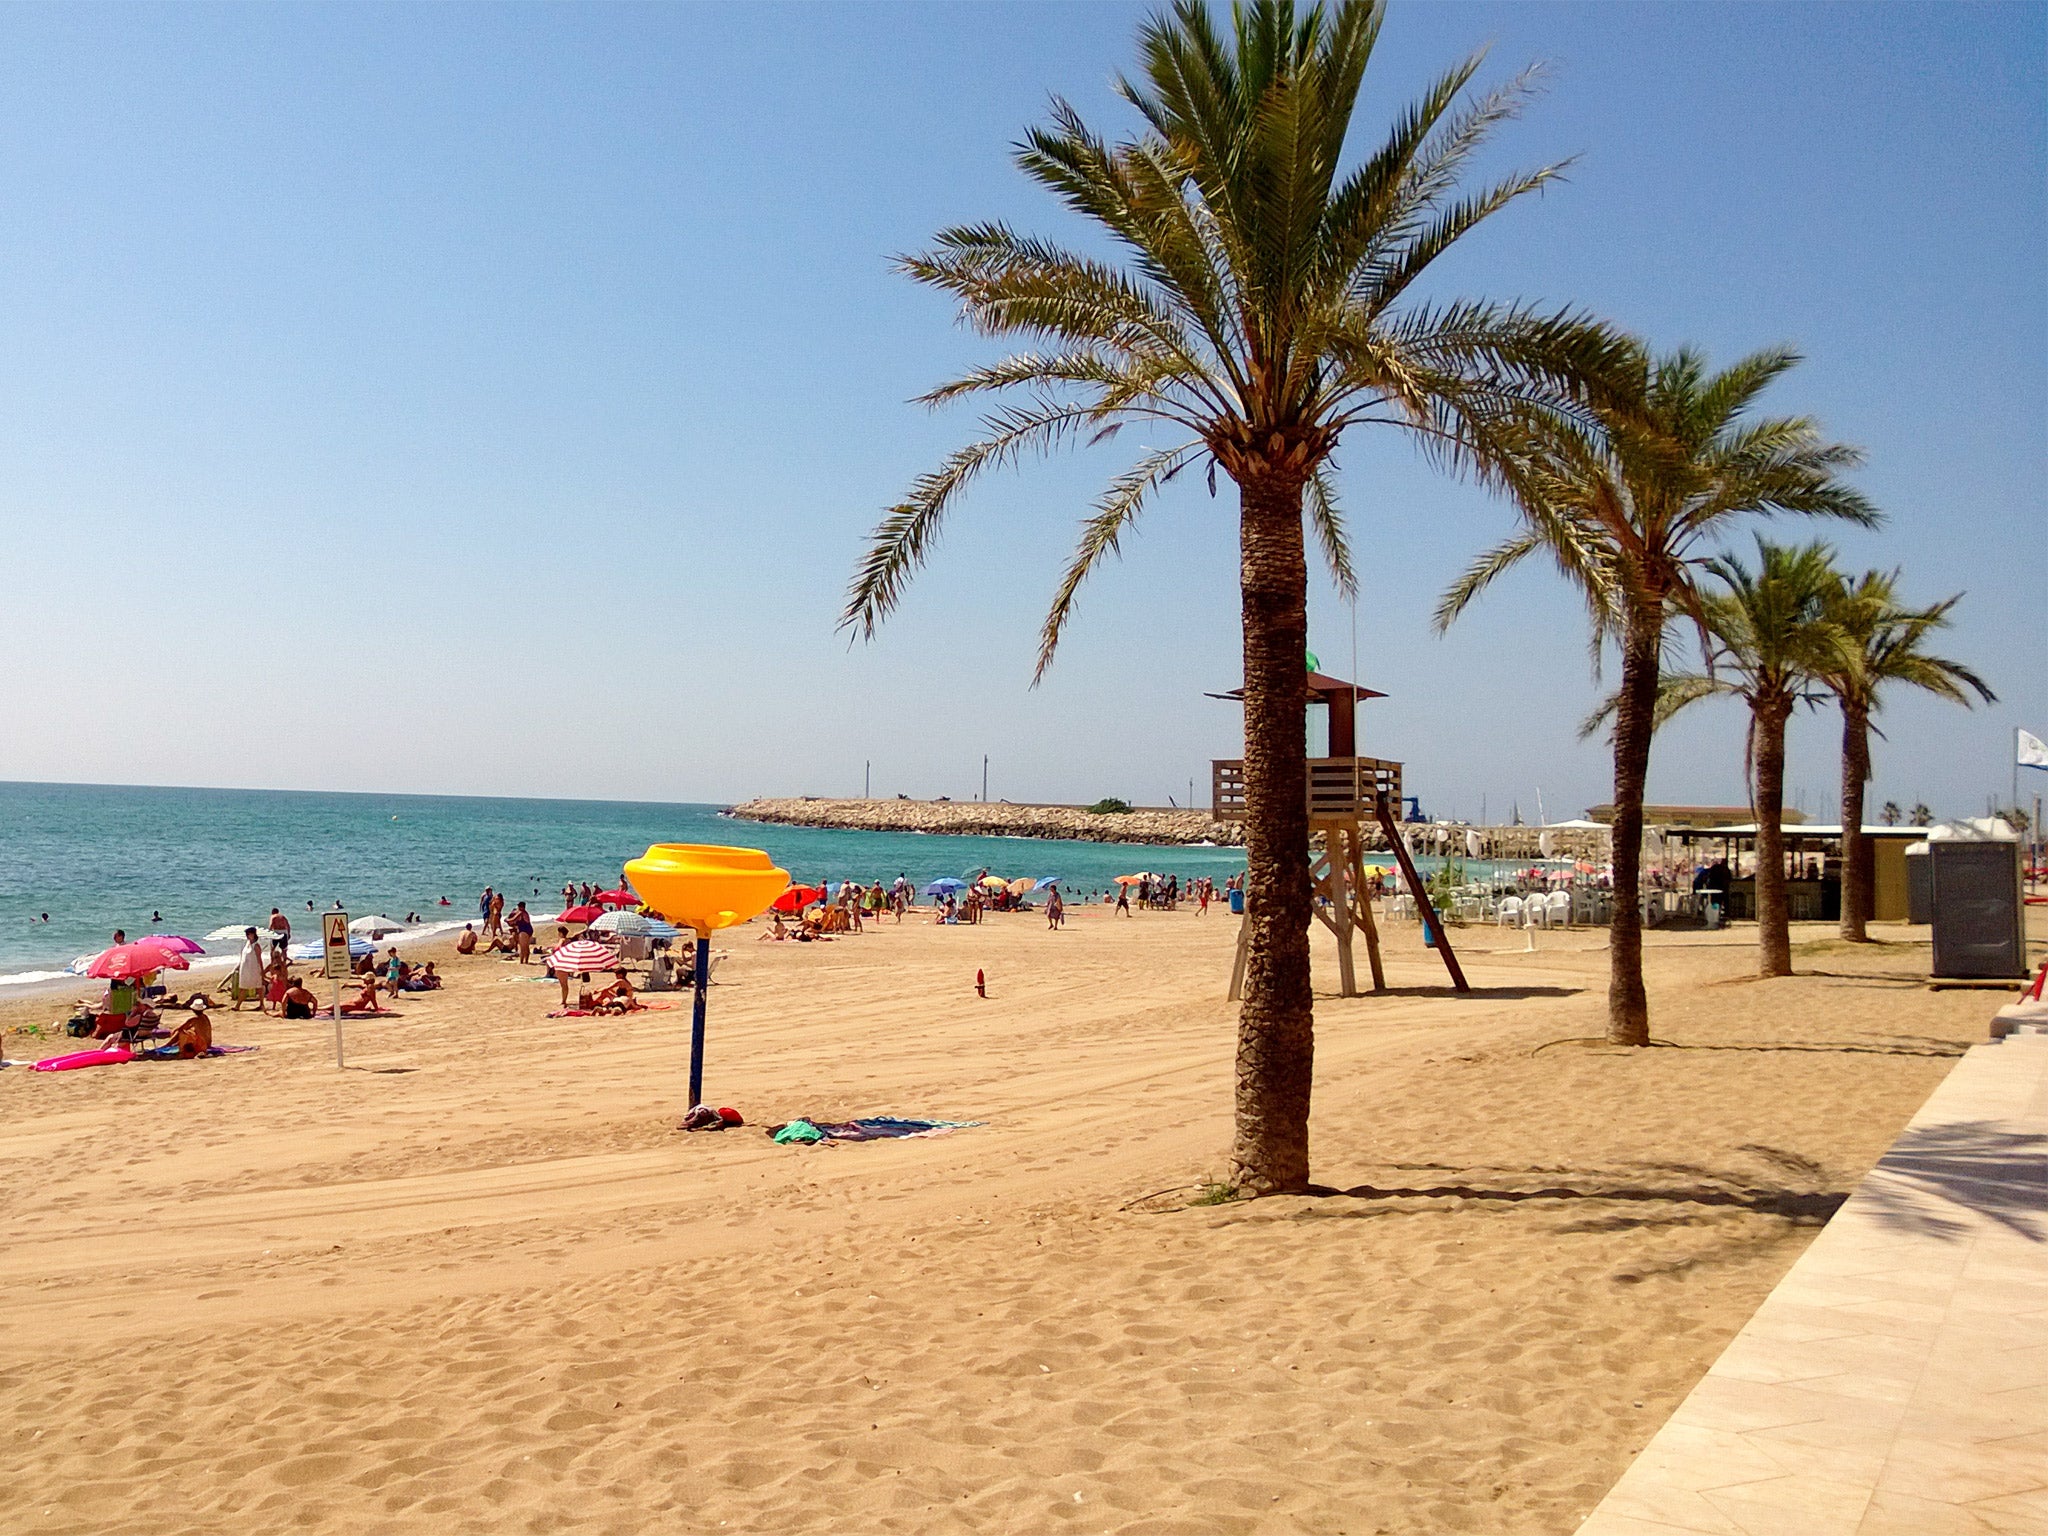 A trip from Stansted to Castellon on Spain’s Mediterranean coast costs £9 return